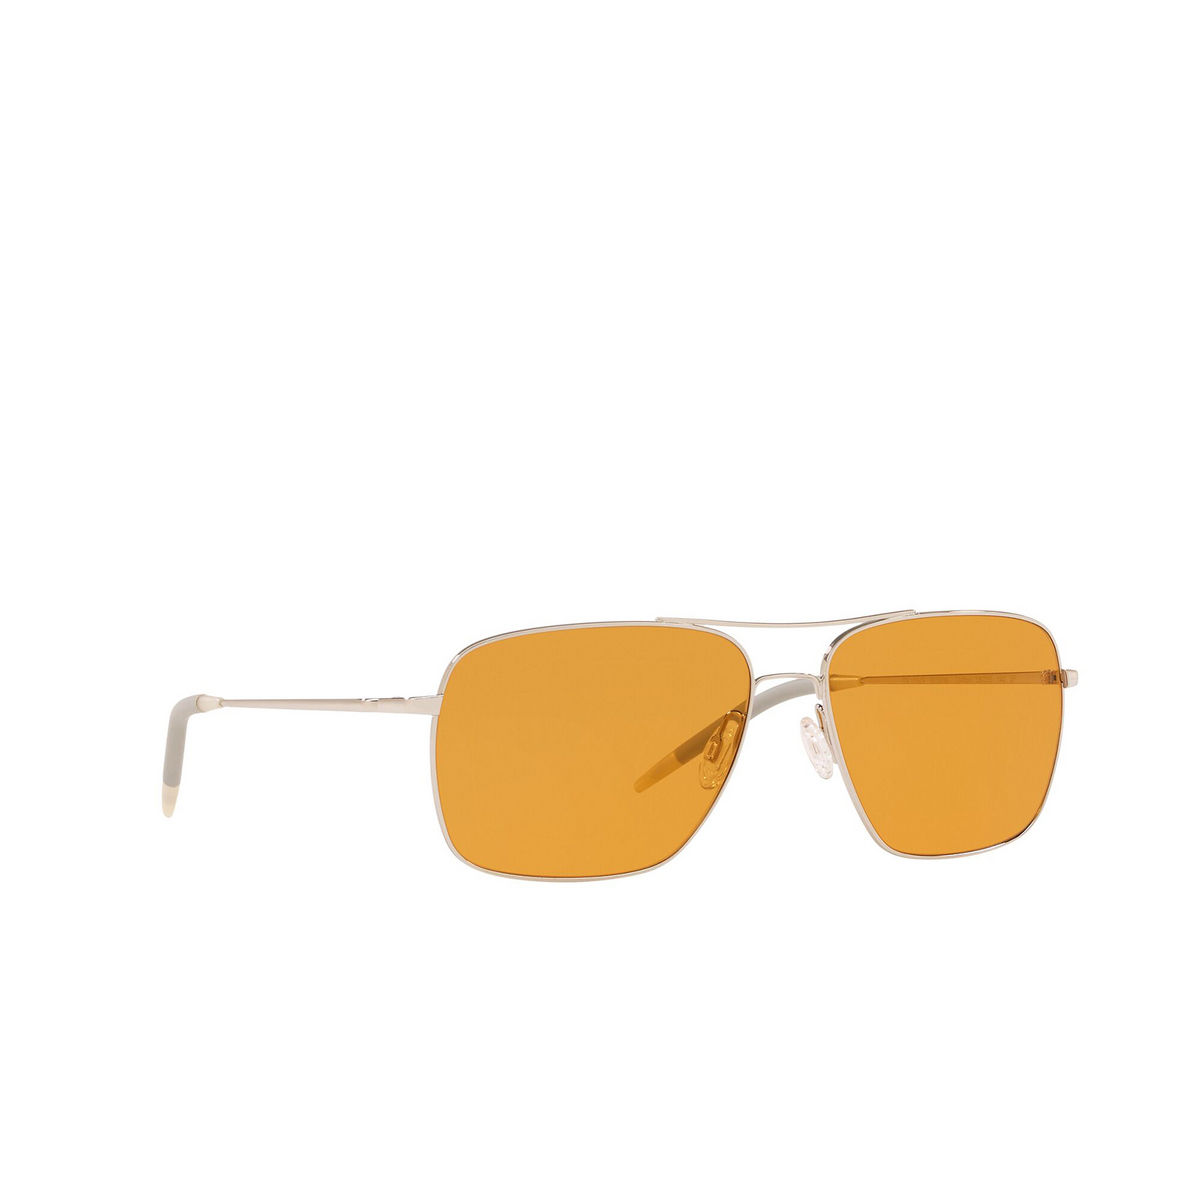 Oliver Peoples® Rectangle Sunglasses: Clifton OV1150S color Silver 5036N9 - three-quarters view.